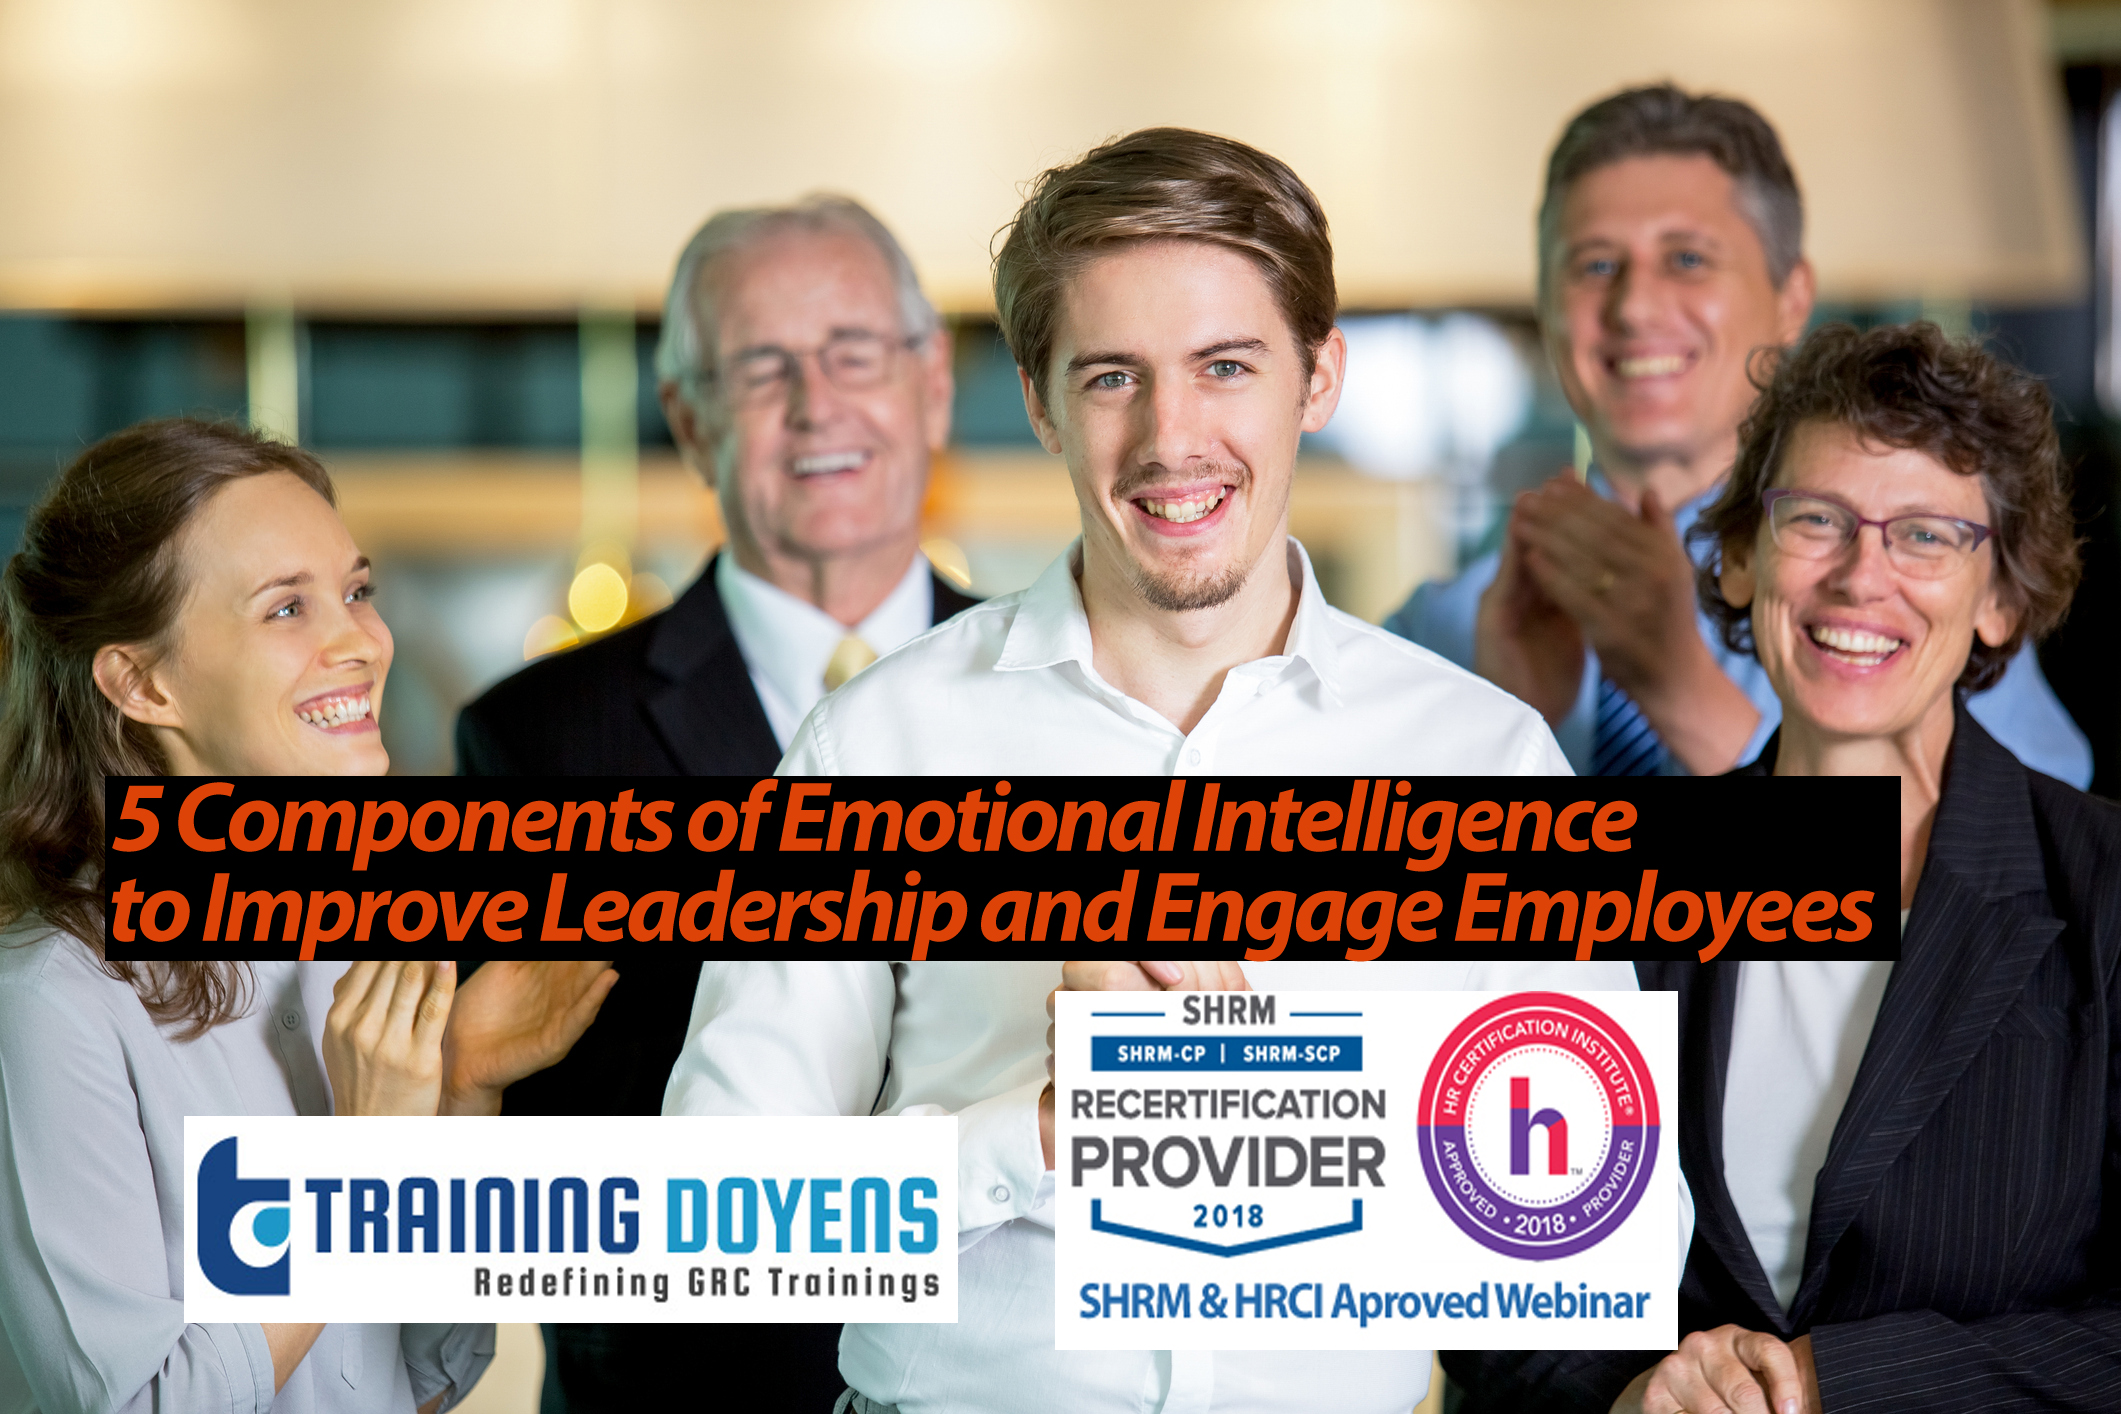 5 Components of Emotional Intelligence to Improve Leadership and Engage Employees: How to Collaborate and Communicate More Effectively, Denver, Colorado, United States